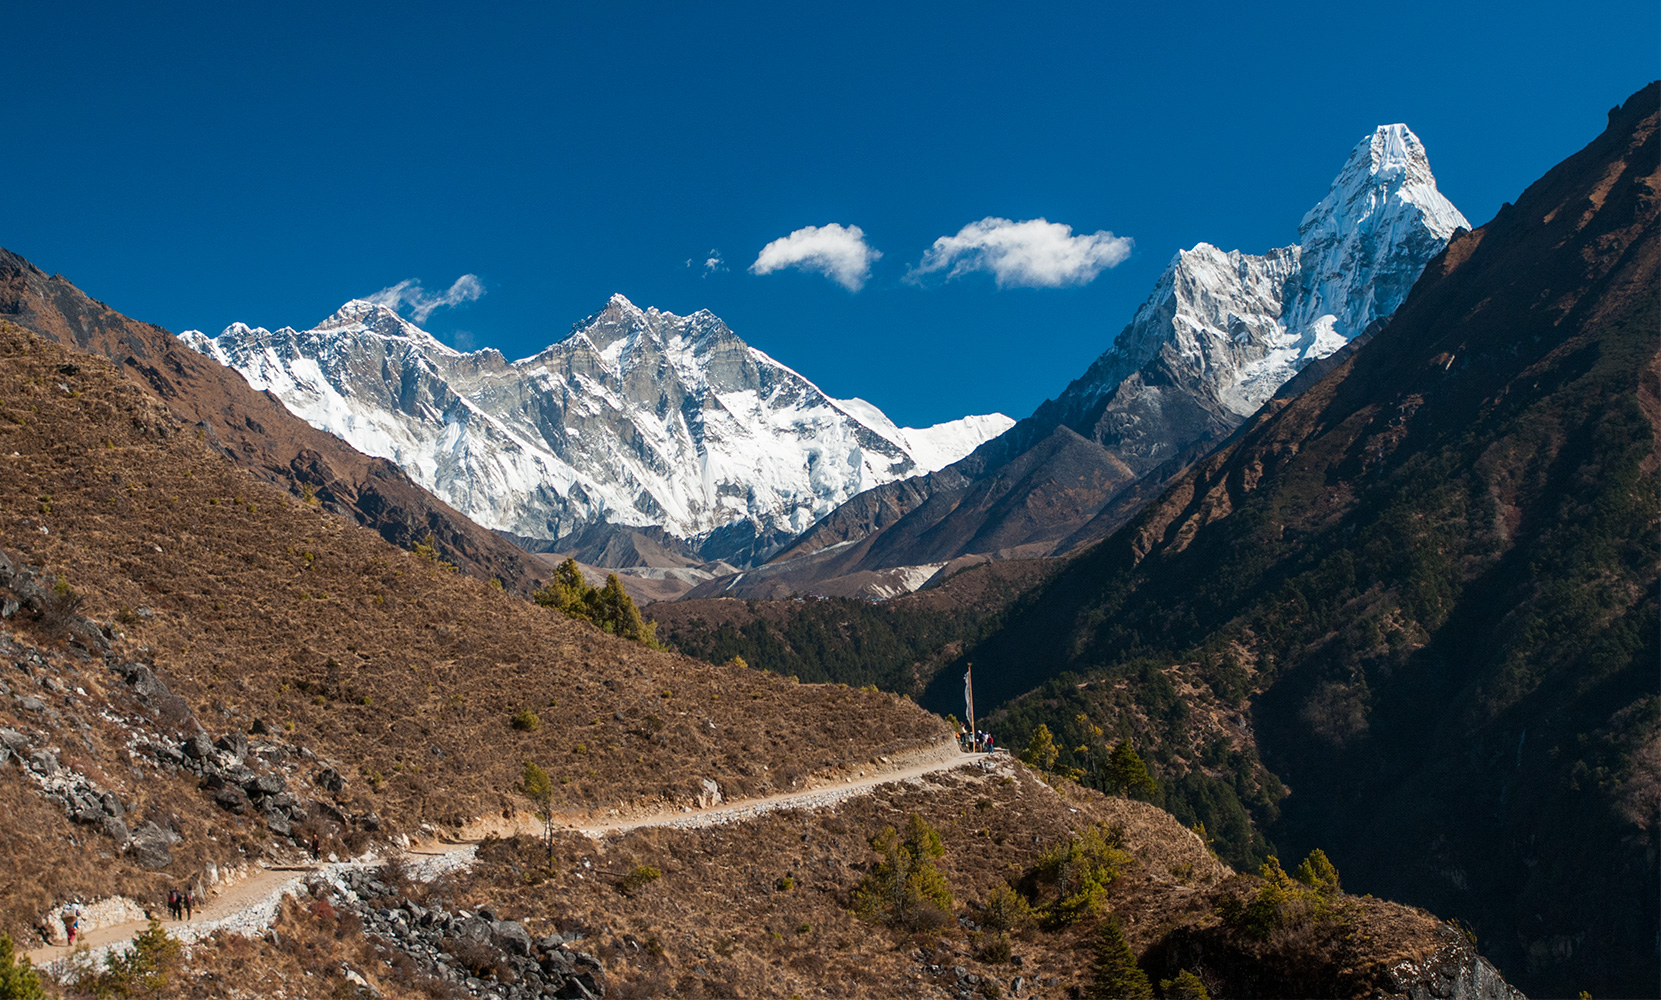 En route from Namche Bazaar to Tengboche, with Everest etc ahead.Nikon D300, 17-35mm. November 2008